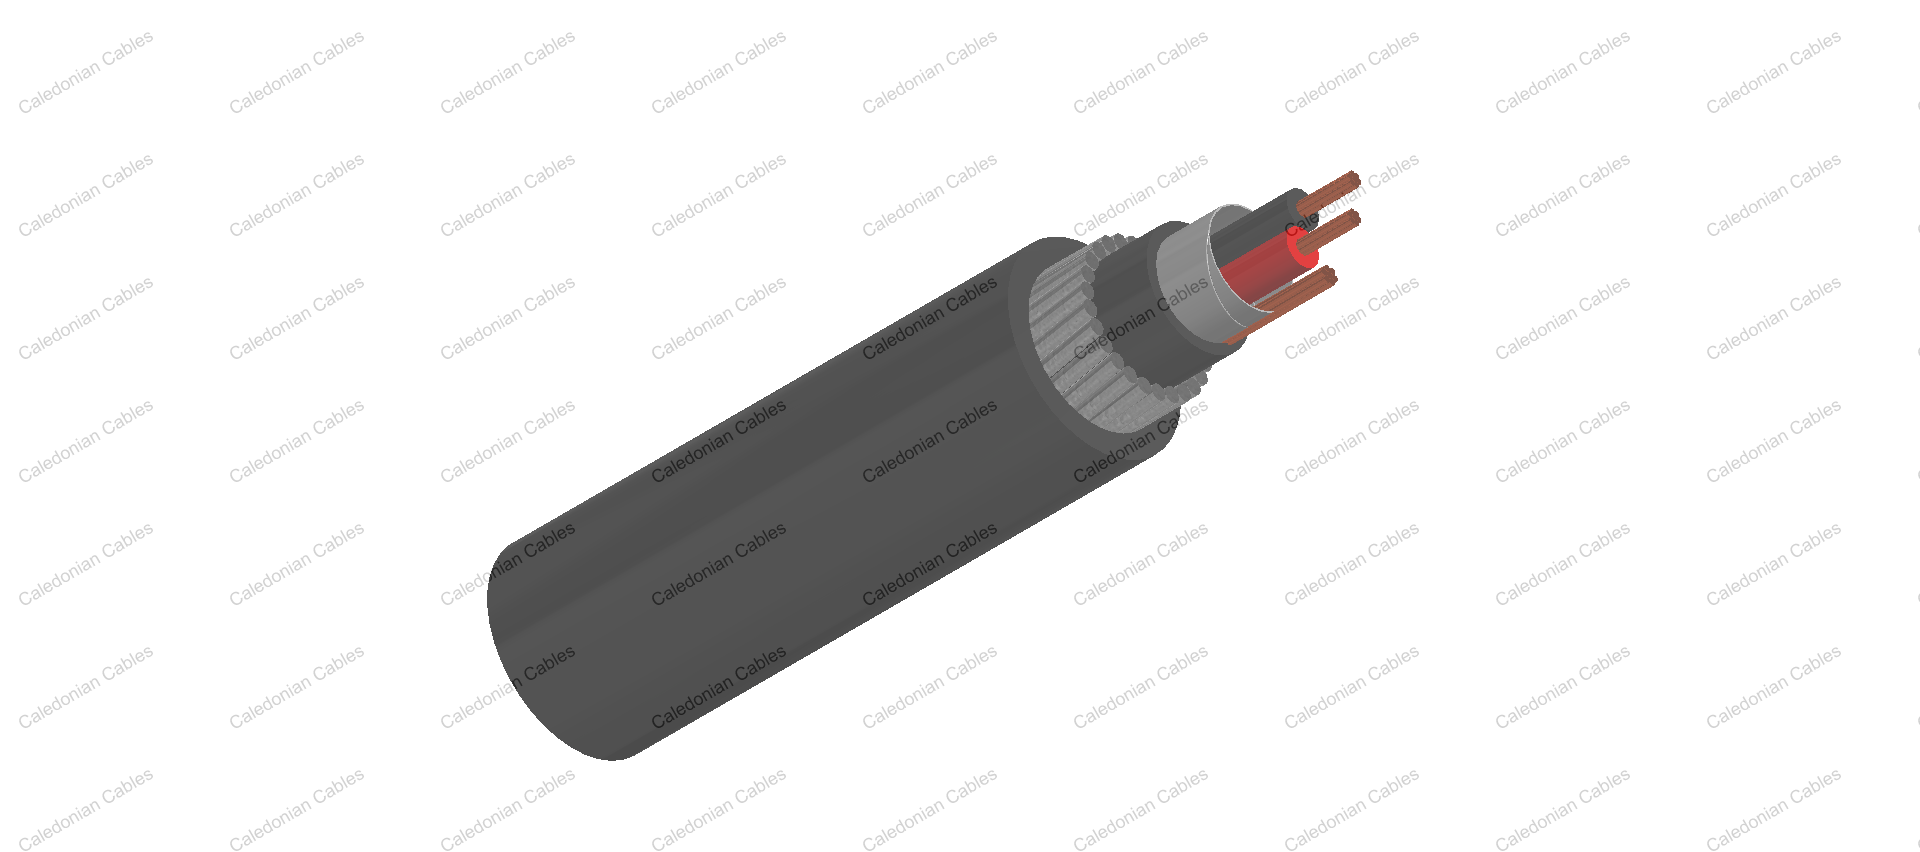 Multipair Overall Screened Armoured Cables-Belden Equivalent 26500